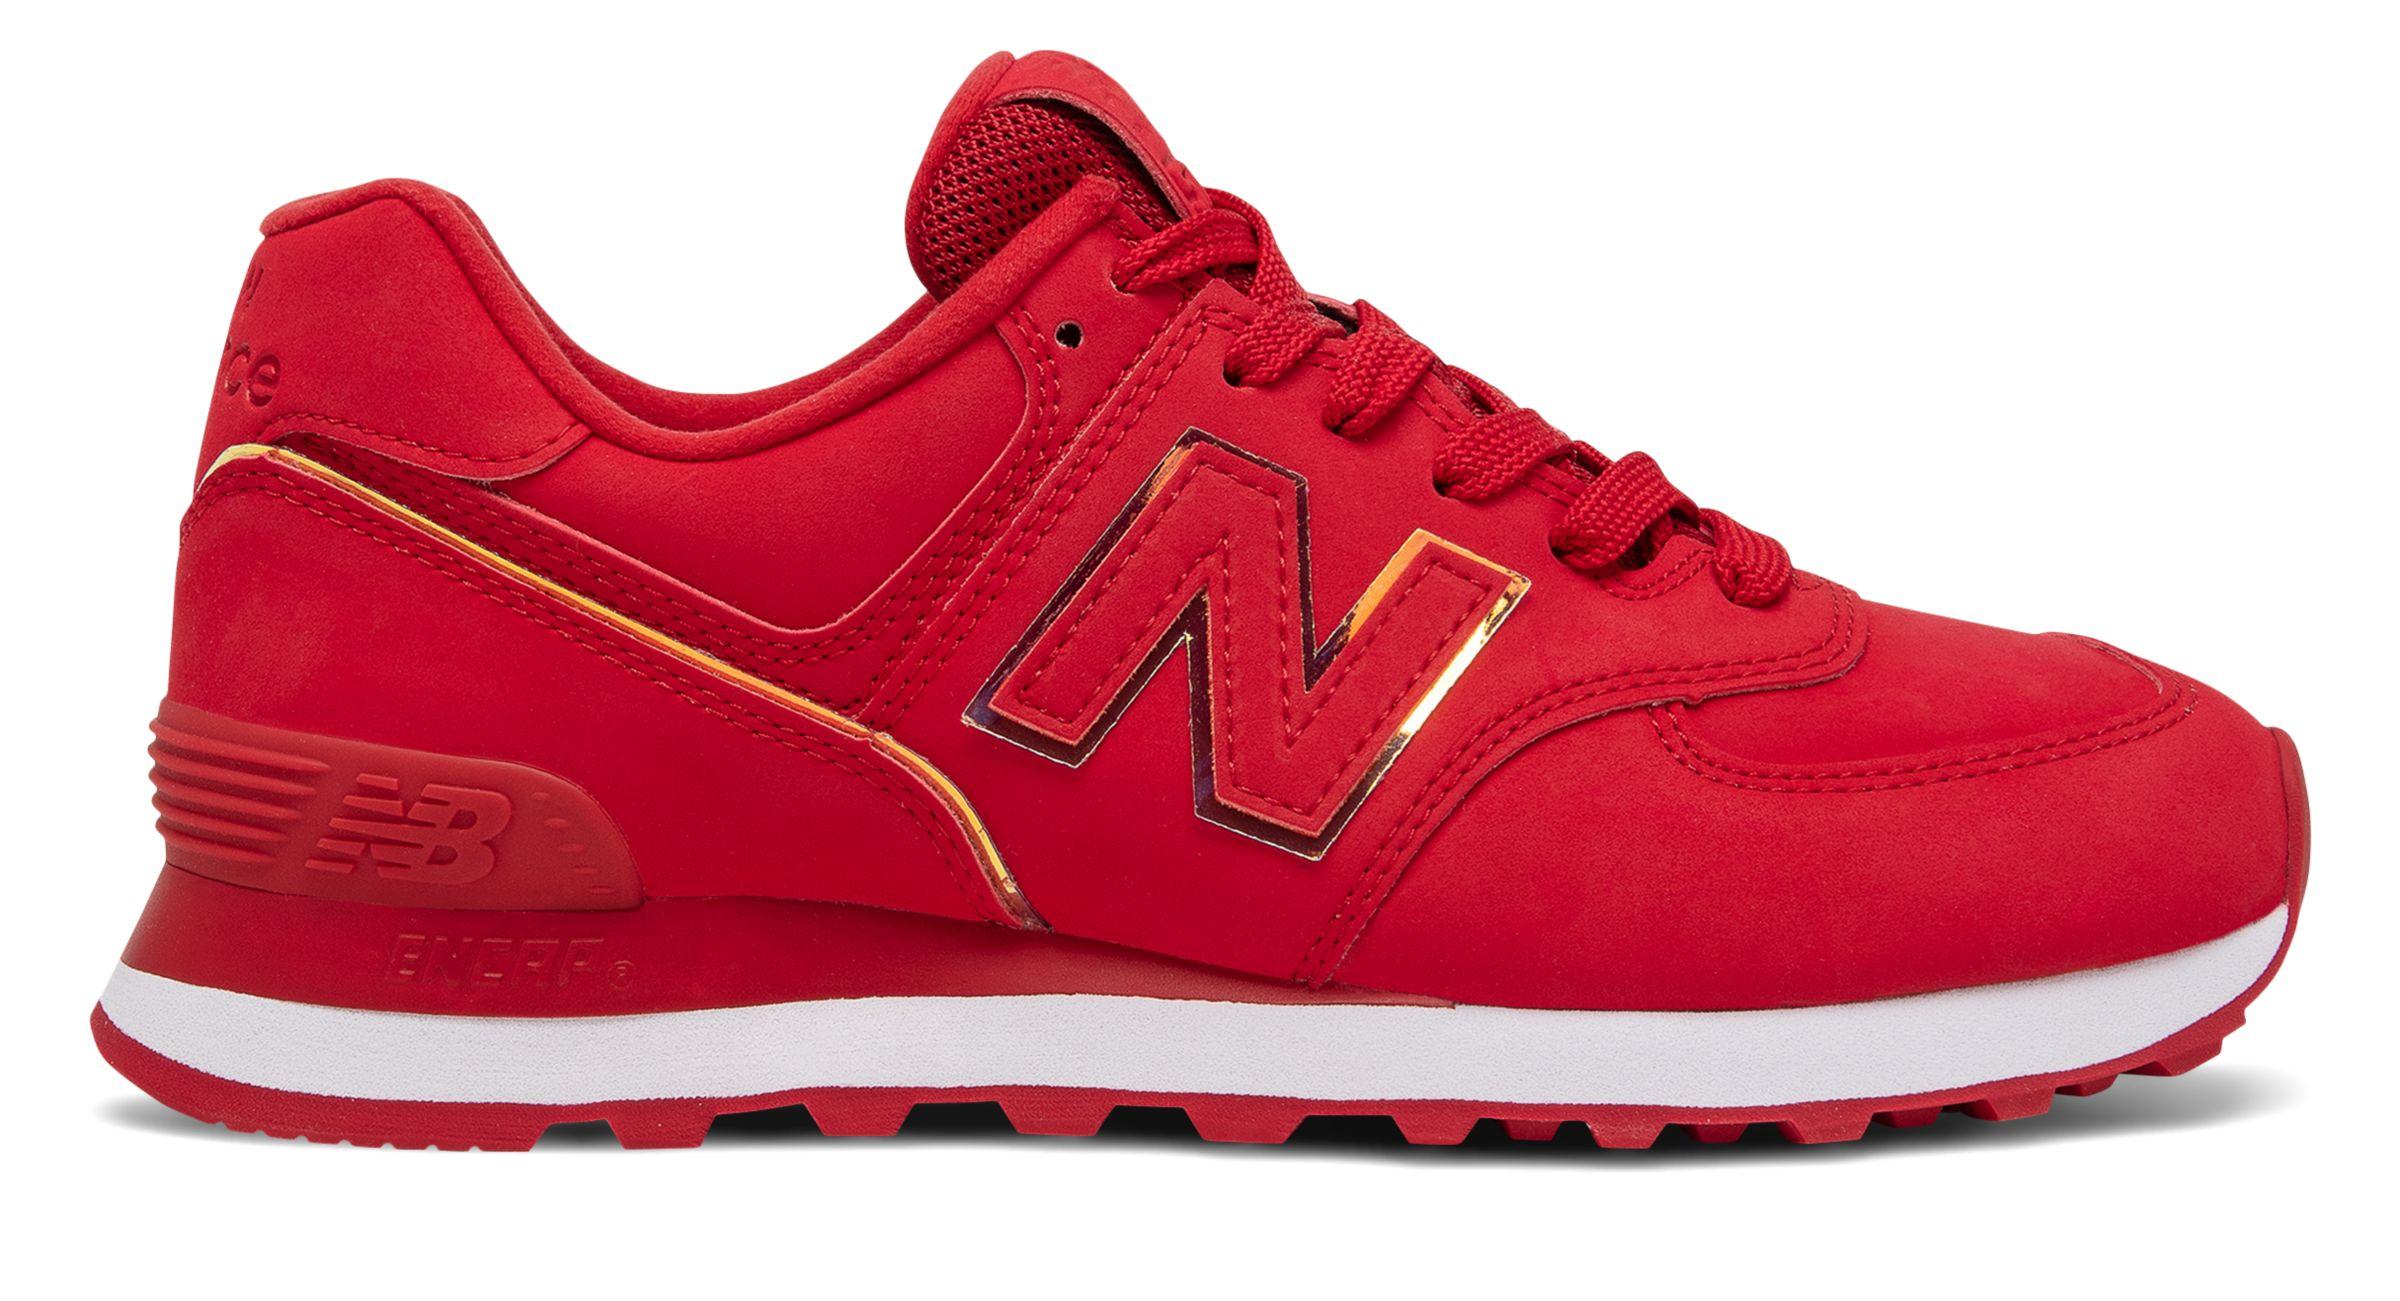 New Balance 574 Running Classics Shoes in Red - Lyst